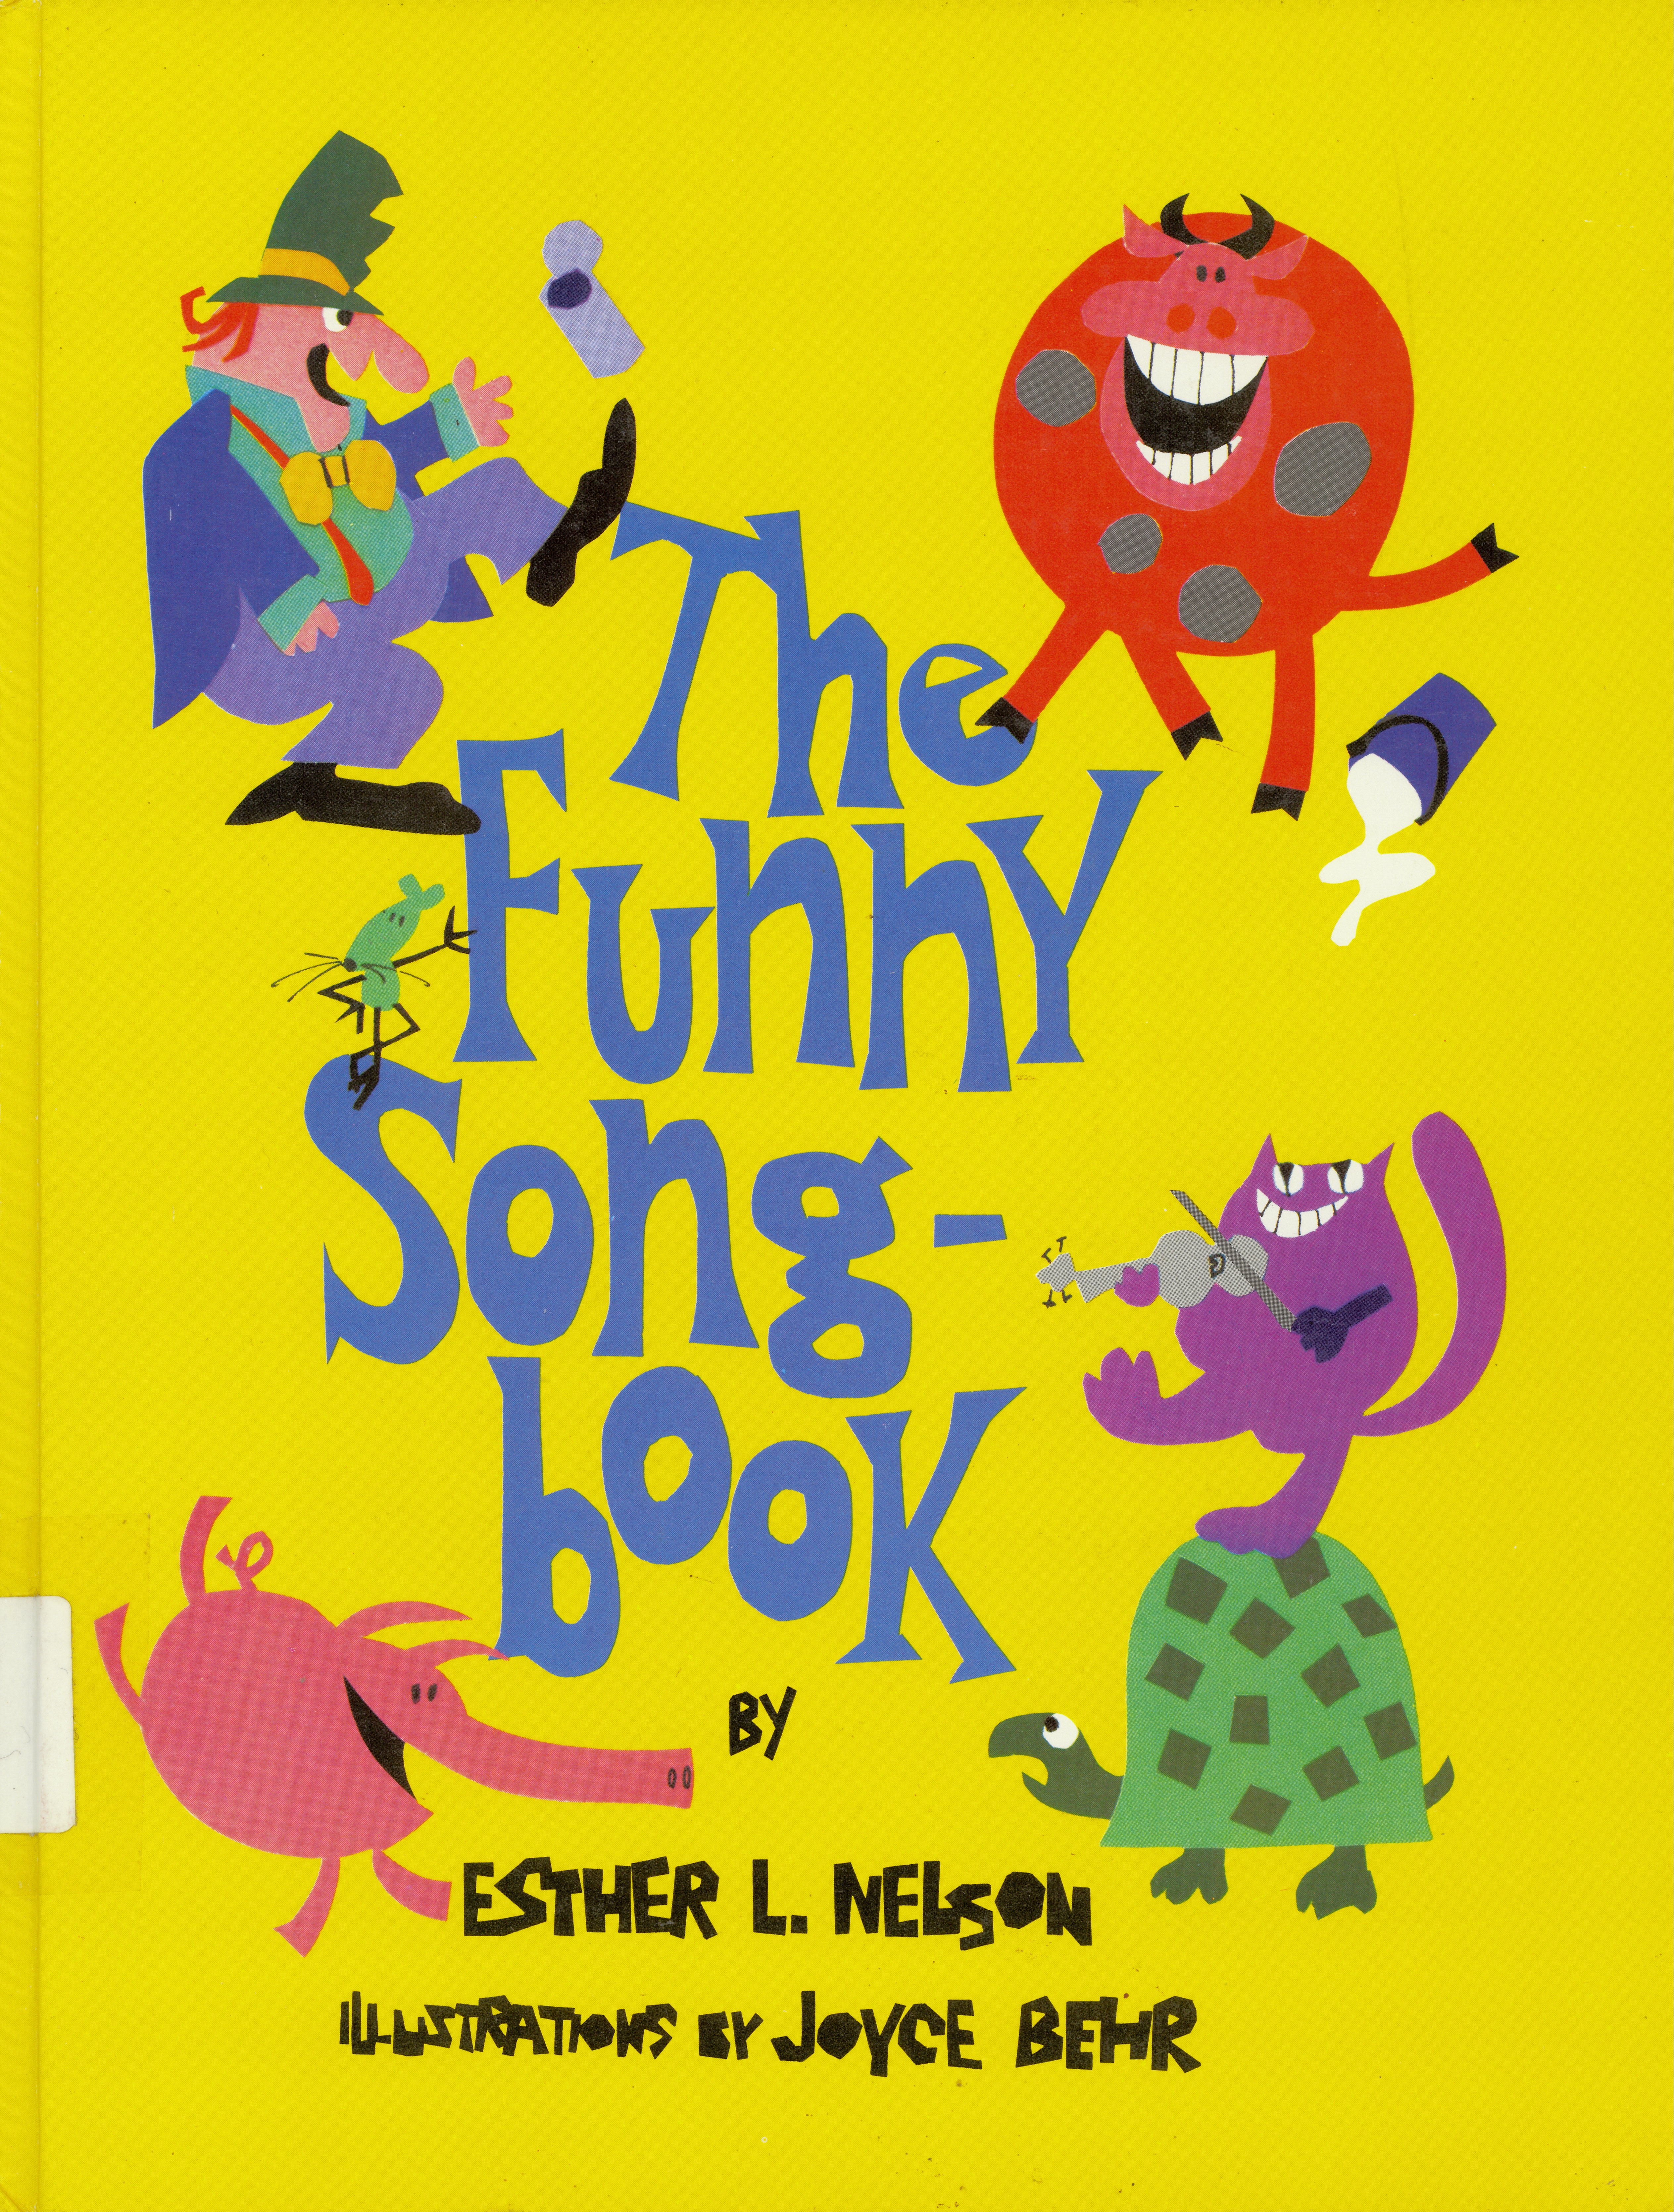 Funny songbook